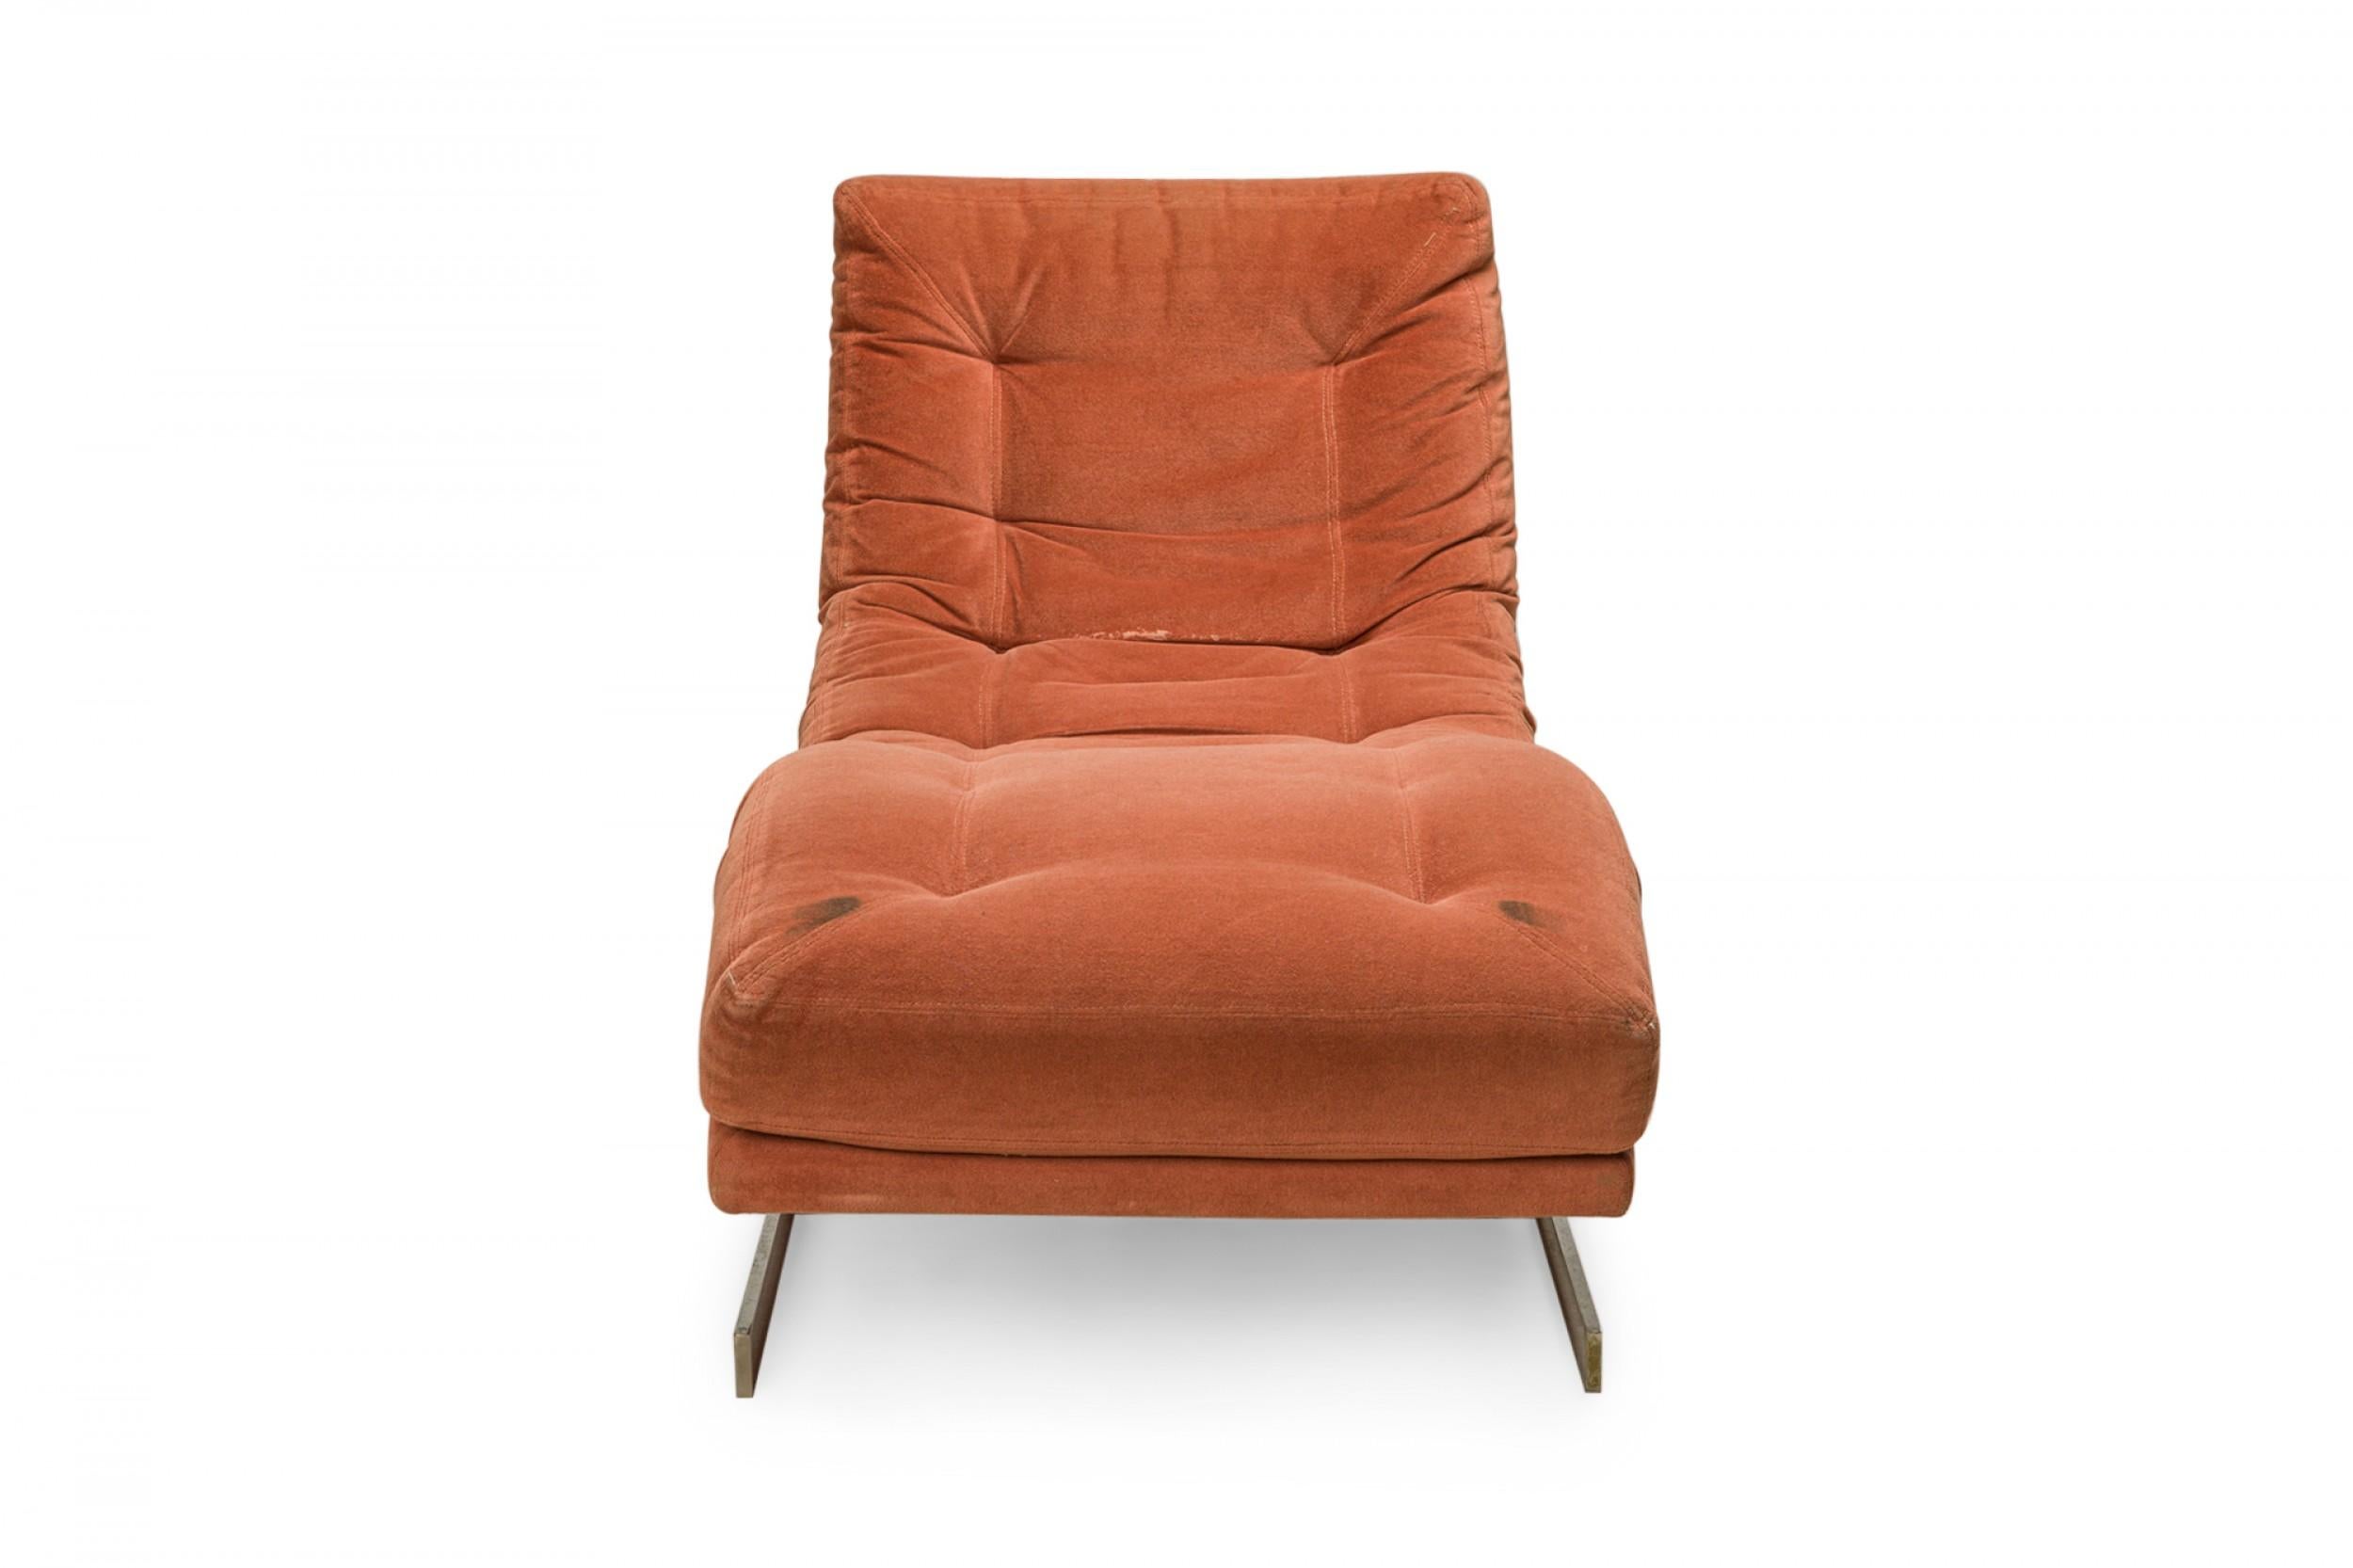 American mid-century 'wave' form chaise lounge with orange velour button tufted upholstery with a T-shaped polished chrome base. (CARSONS)(Available in different upholstery: DUF0350, DUF0351, DUF0352)
 